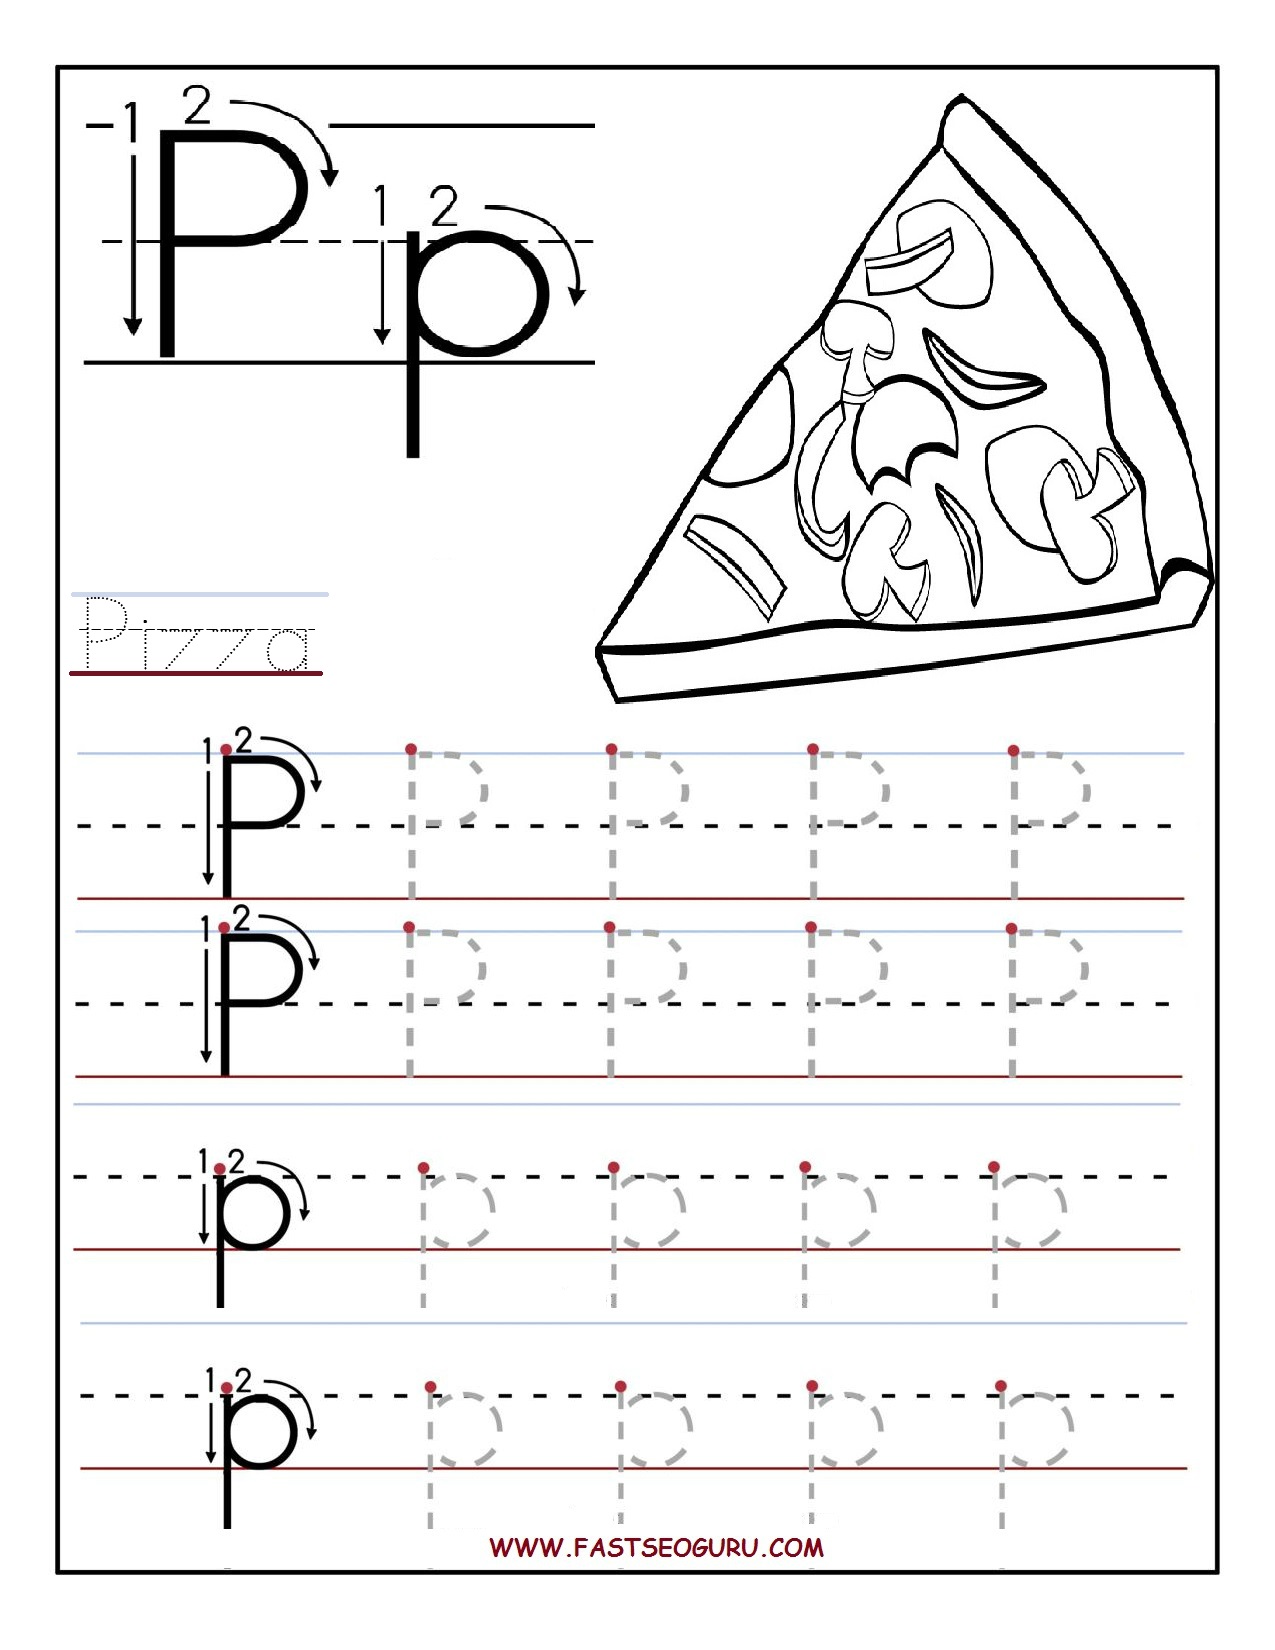 printable-letter-p-tracing-worksheets-for-preschool